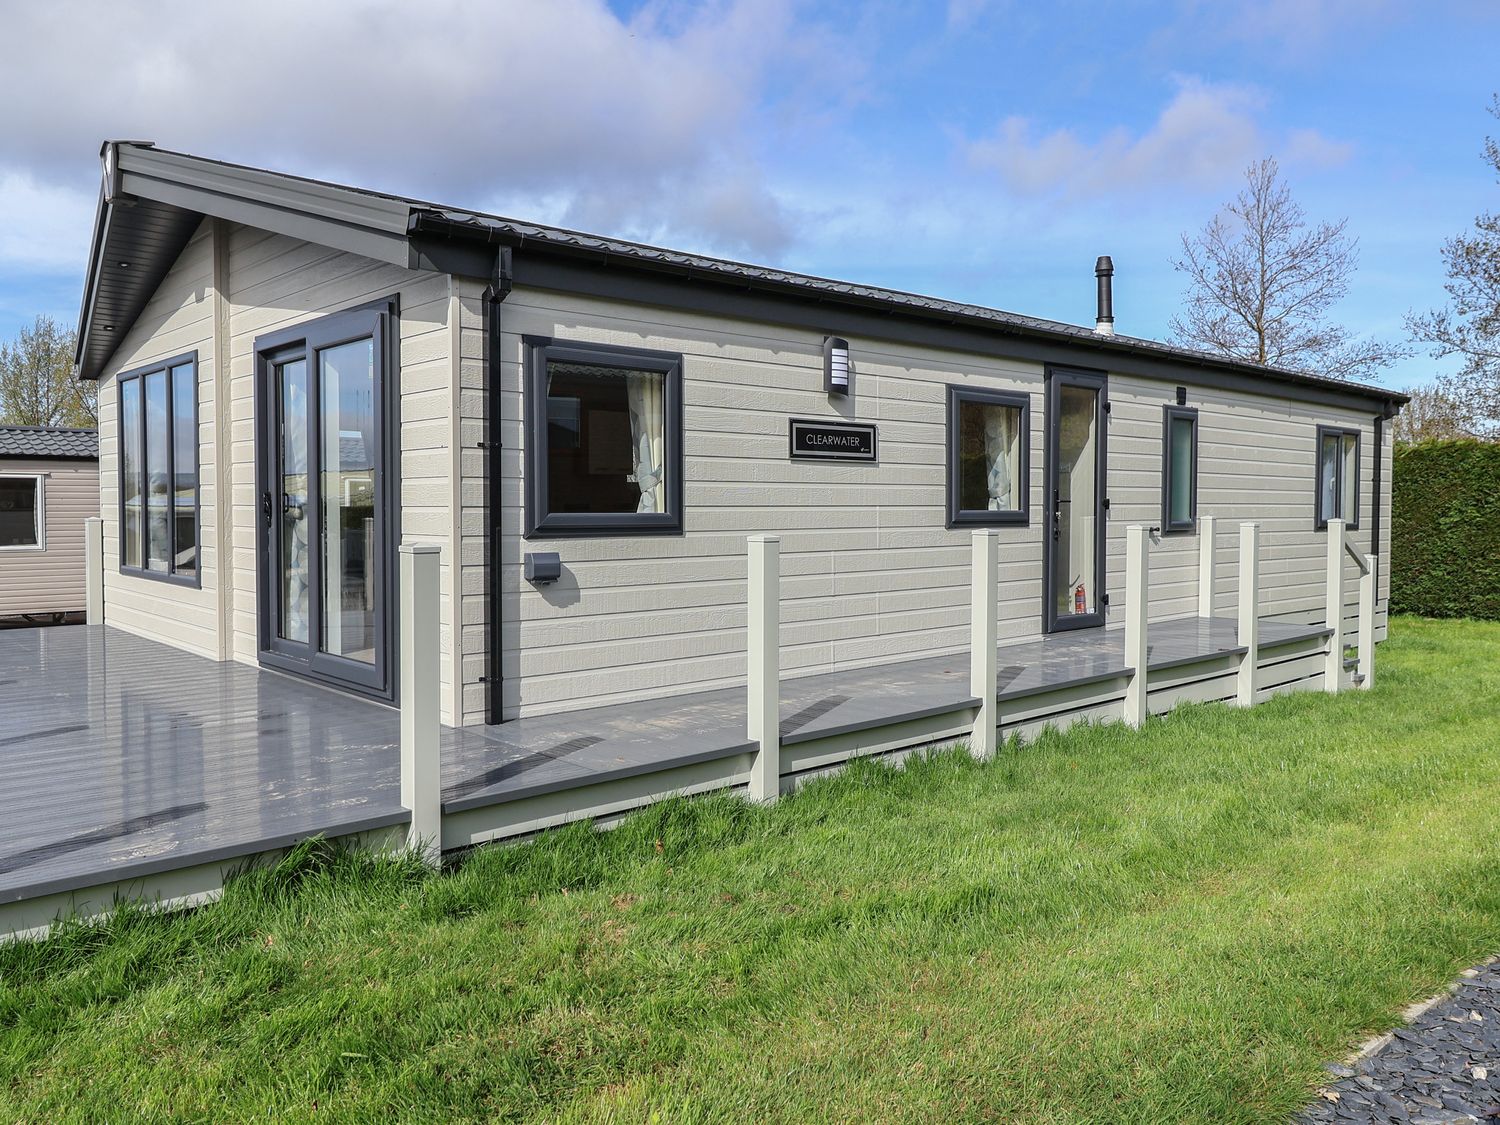 Lodge 3 in St Asaph, Denbighshire, North Wales. Single-storey. Smart TV. Decking. On-site facilities